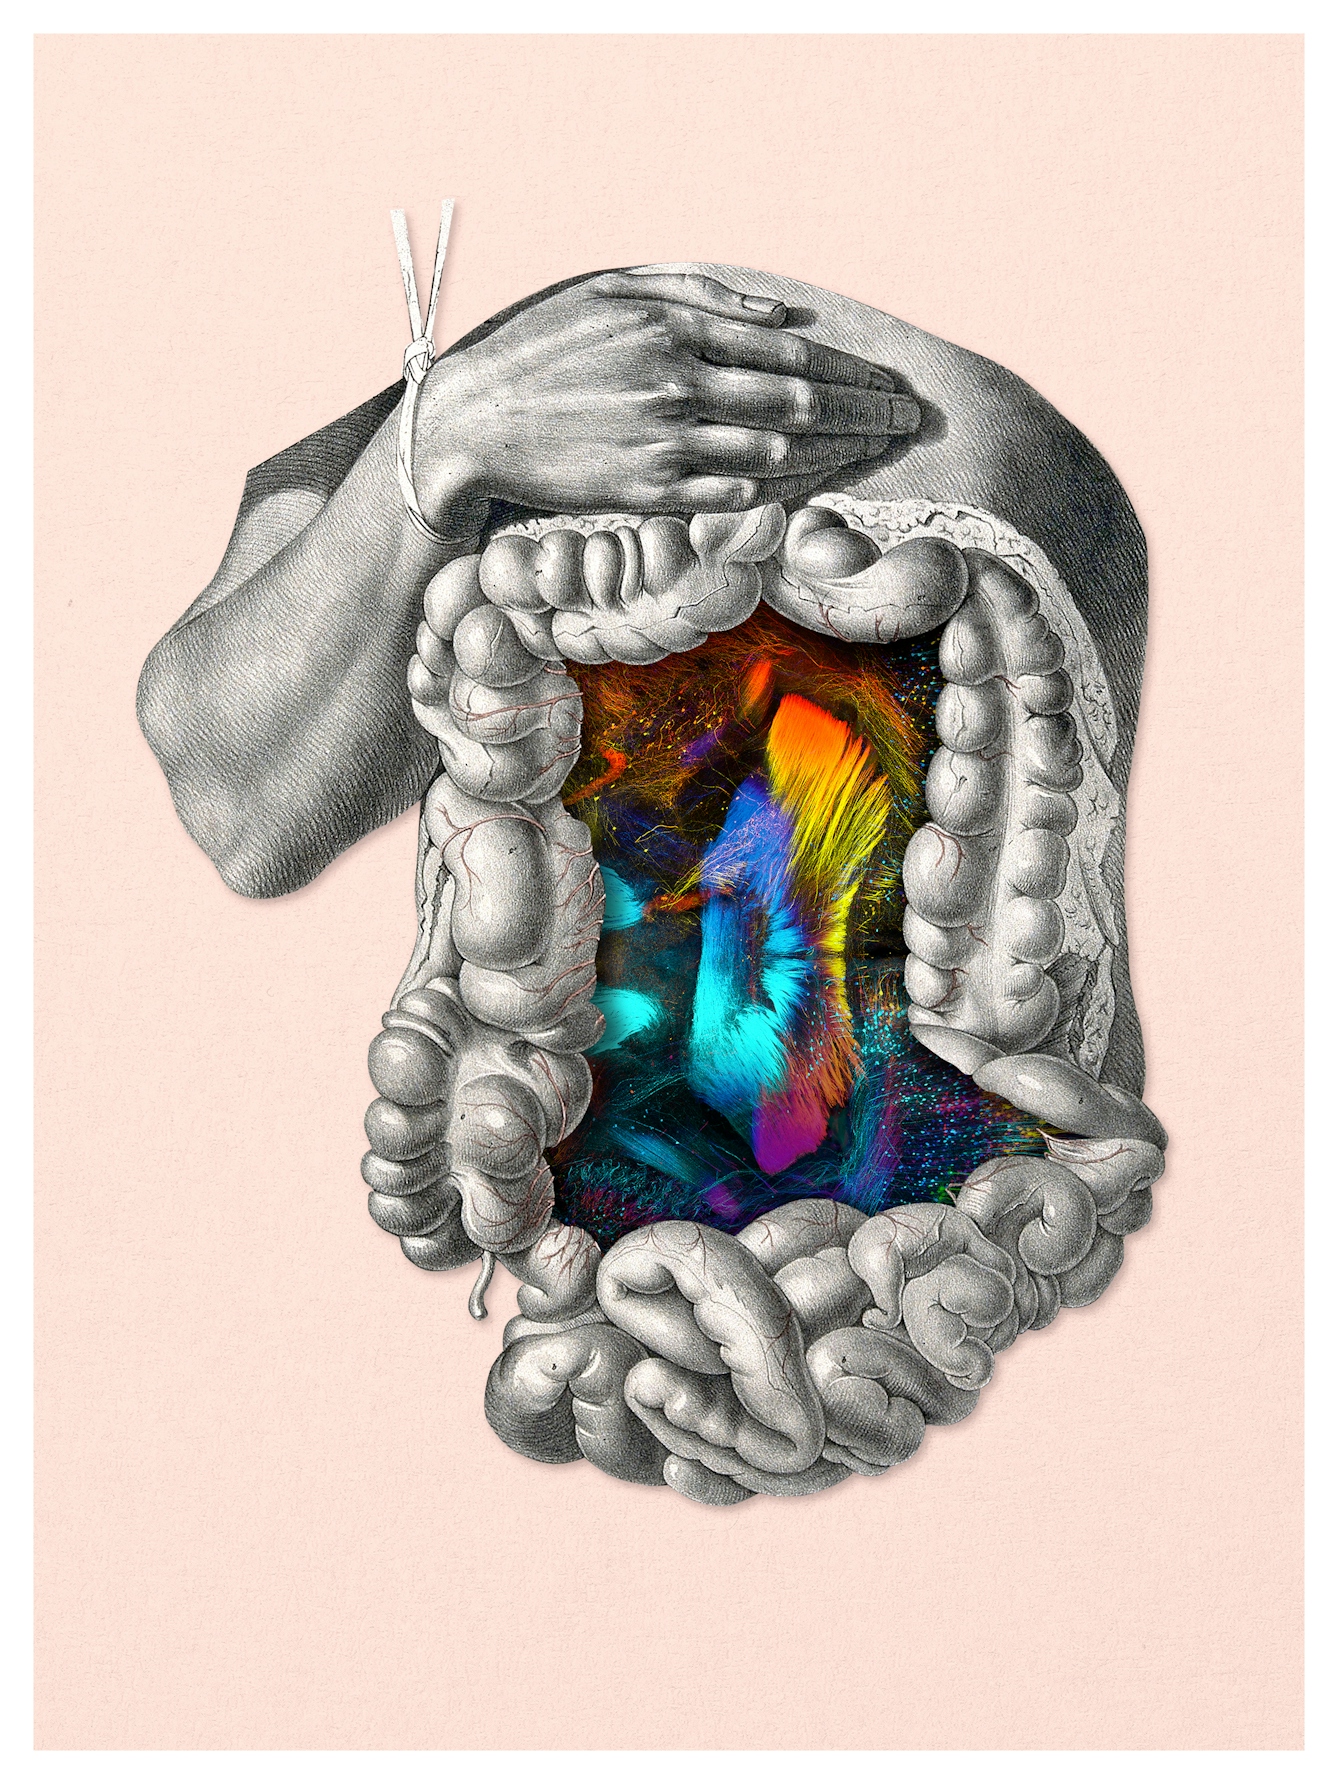 Digital collage of archival material. The mid section of a body has been isolated. Surrounding the stomach area are the intestines.  Inside the chest cavity are colour renditions of electrical impulses.